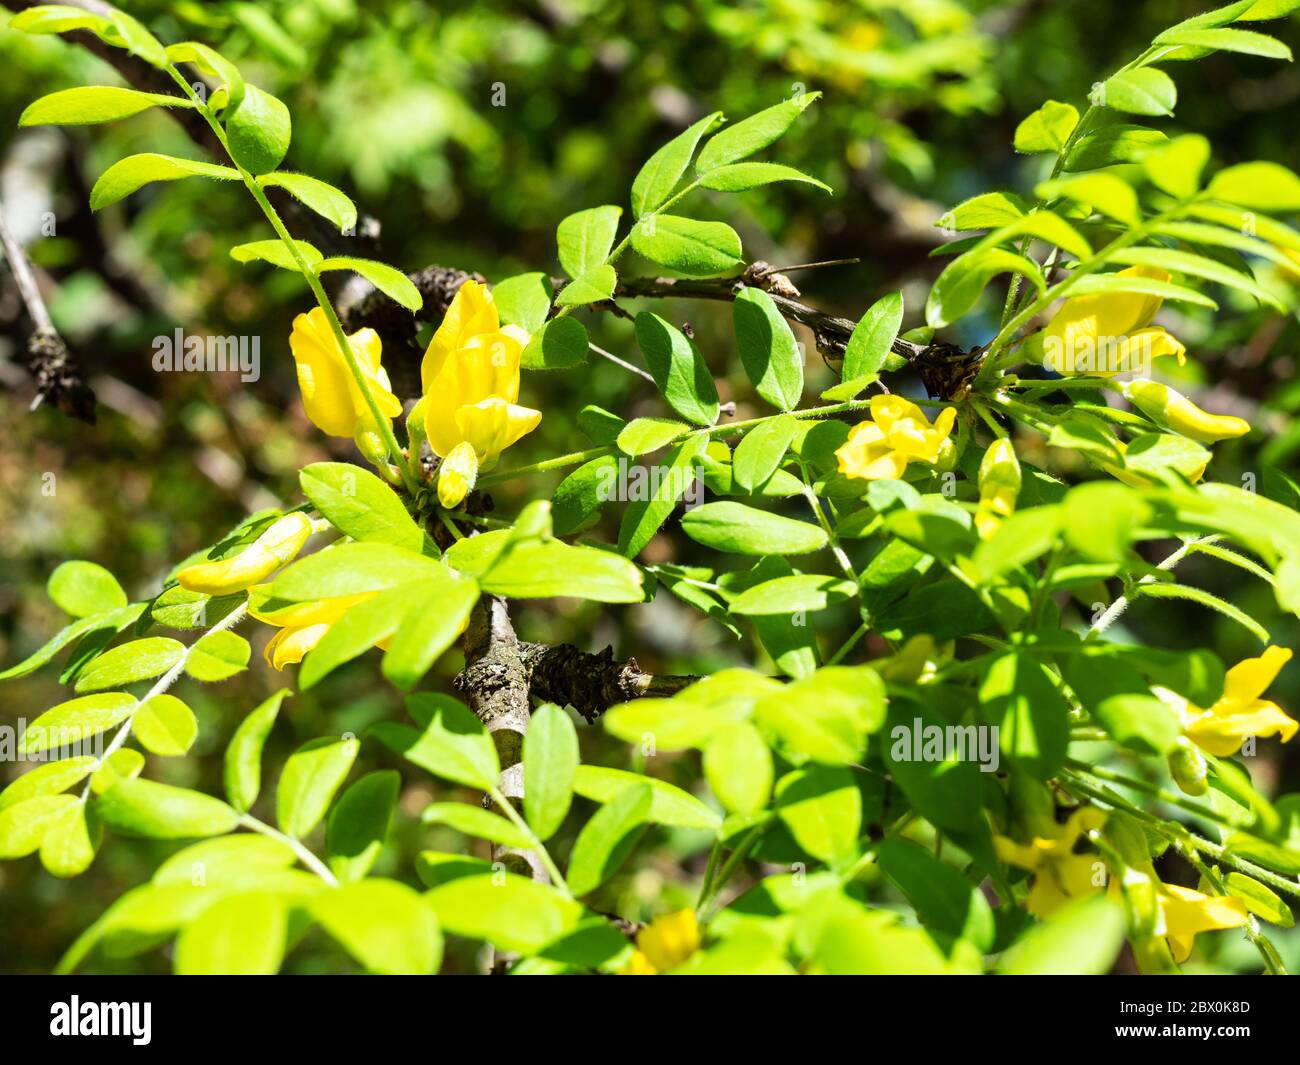 spring in city - yellow blossoms between green leaves of Siberian Pea Tree (caragana) in urban park on sunny day (focus on the flowers) Stock Photo